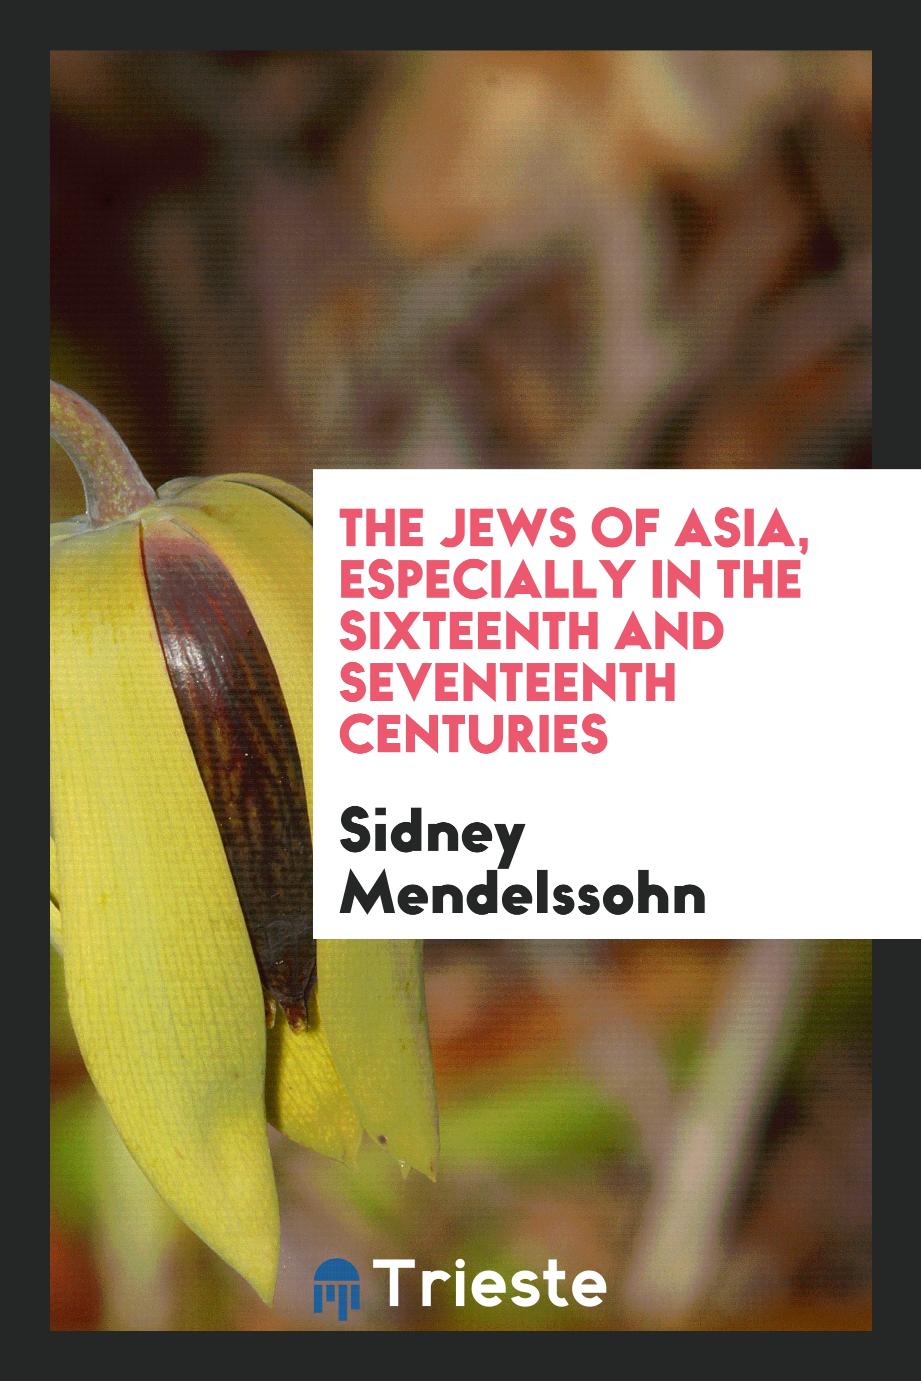 The Jews of Asia, especially in the sixteenth and seventeenth centuries